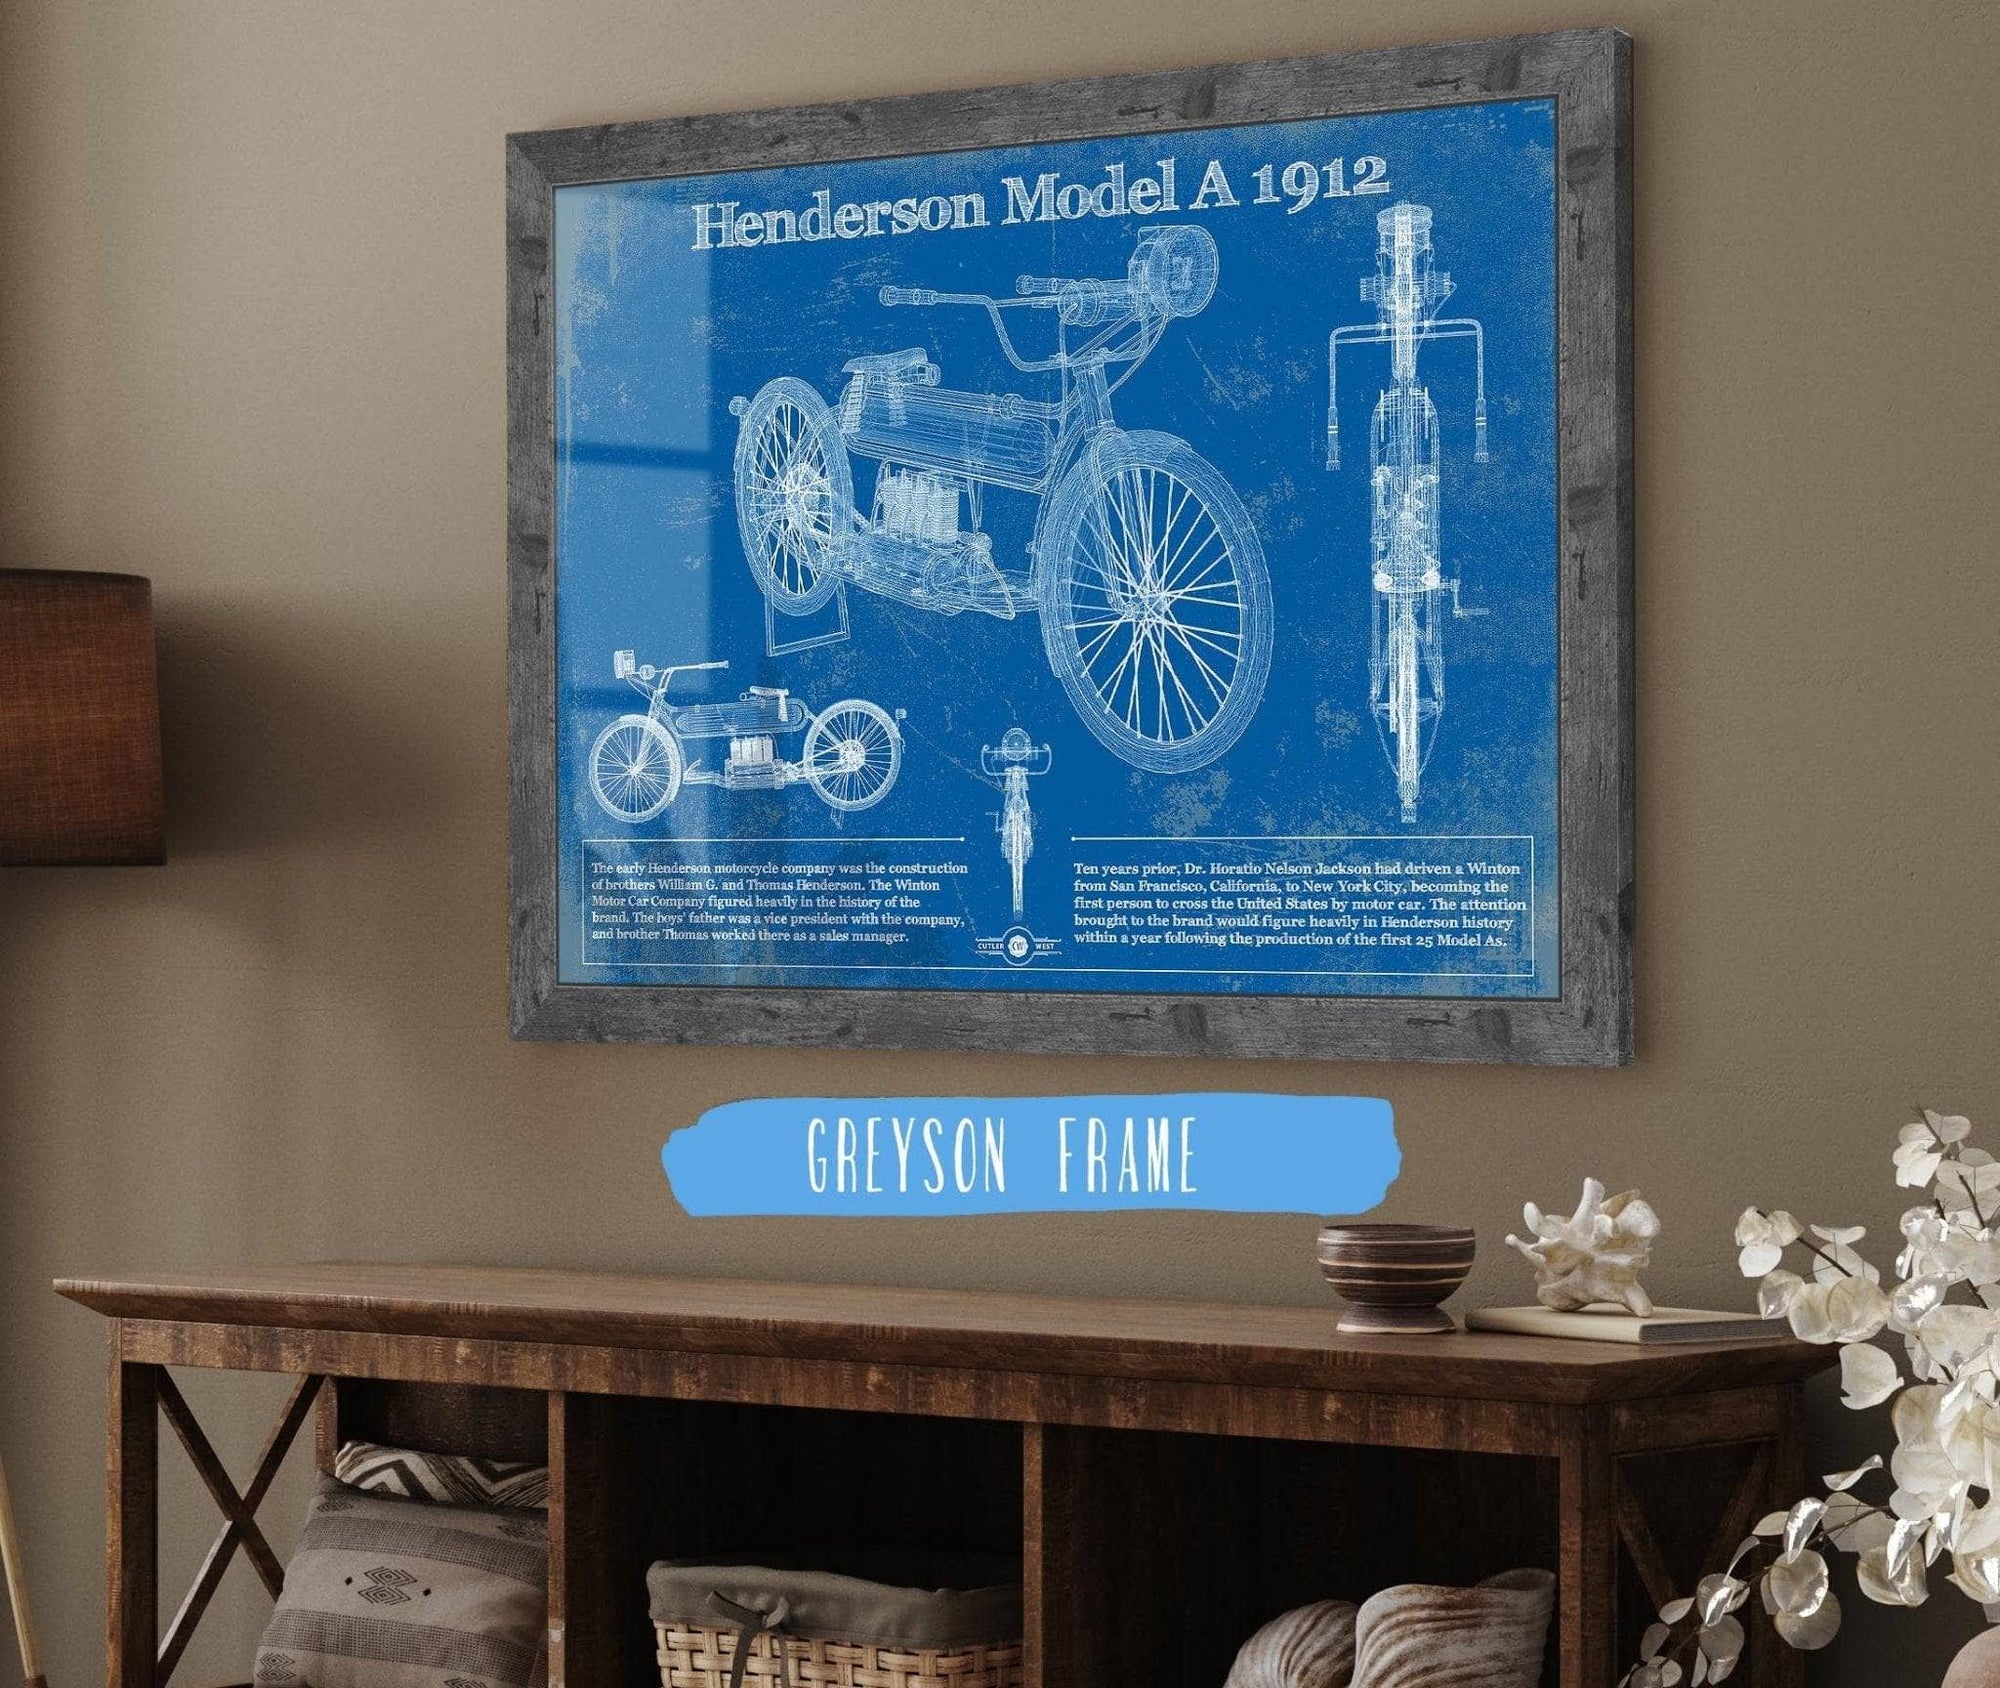 Cutler West 14" x 11" / Greyson Frame Henderson Model A 1912 Motorcycle Patent Print 945000345_63659